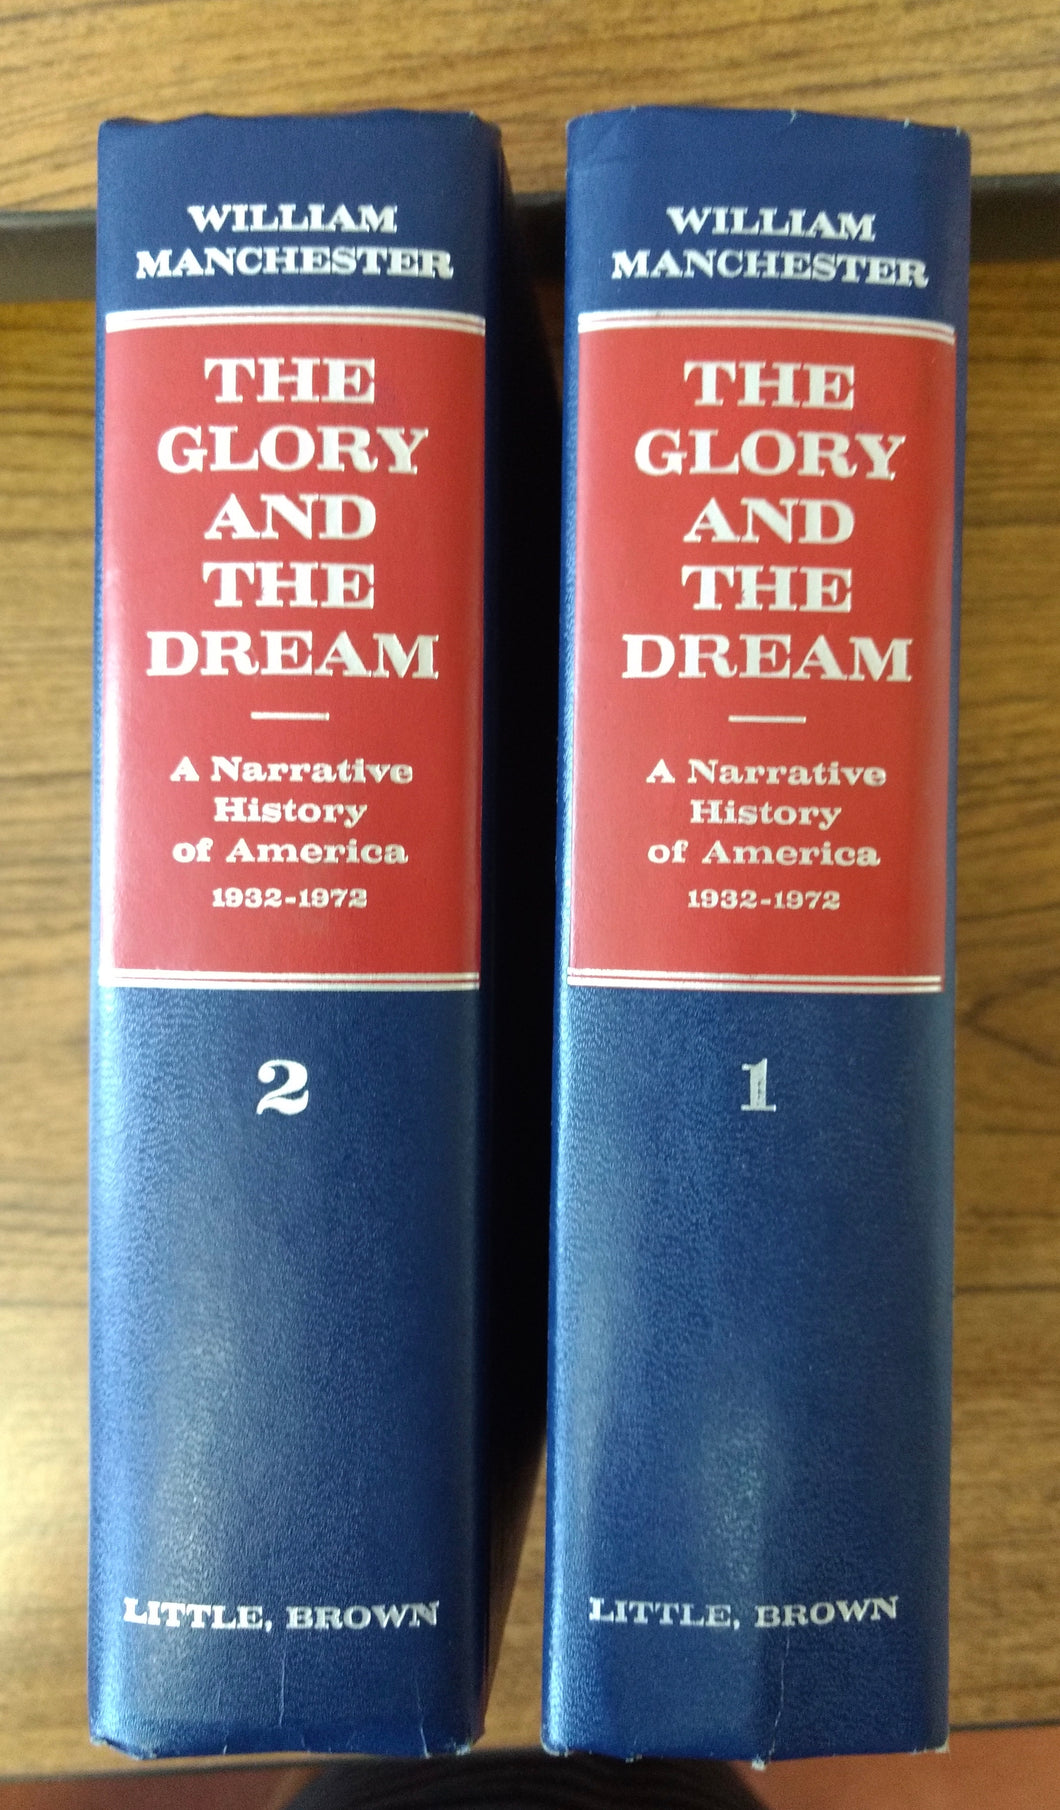 The Glory and the Dream: A Narrative history of America 1932-1972 (2 Volume Set) by William Manchester